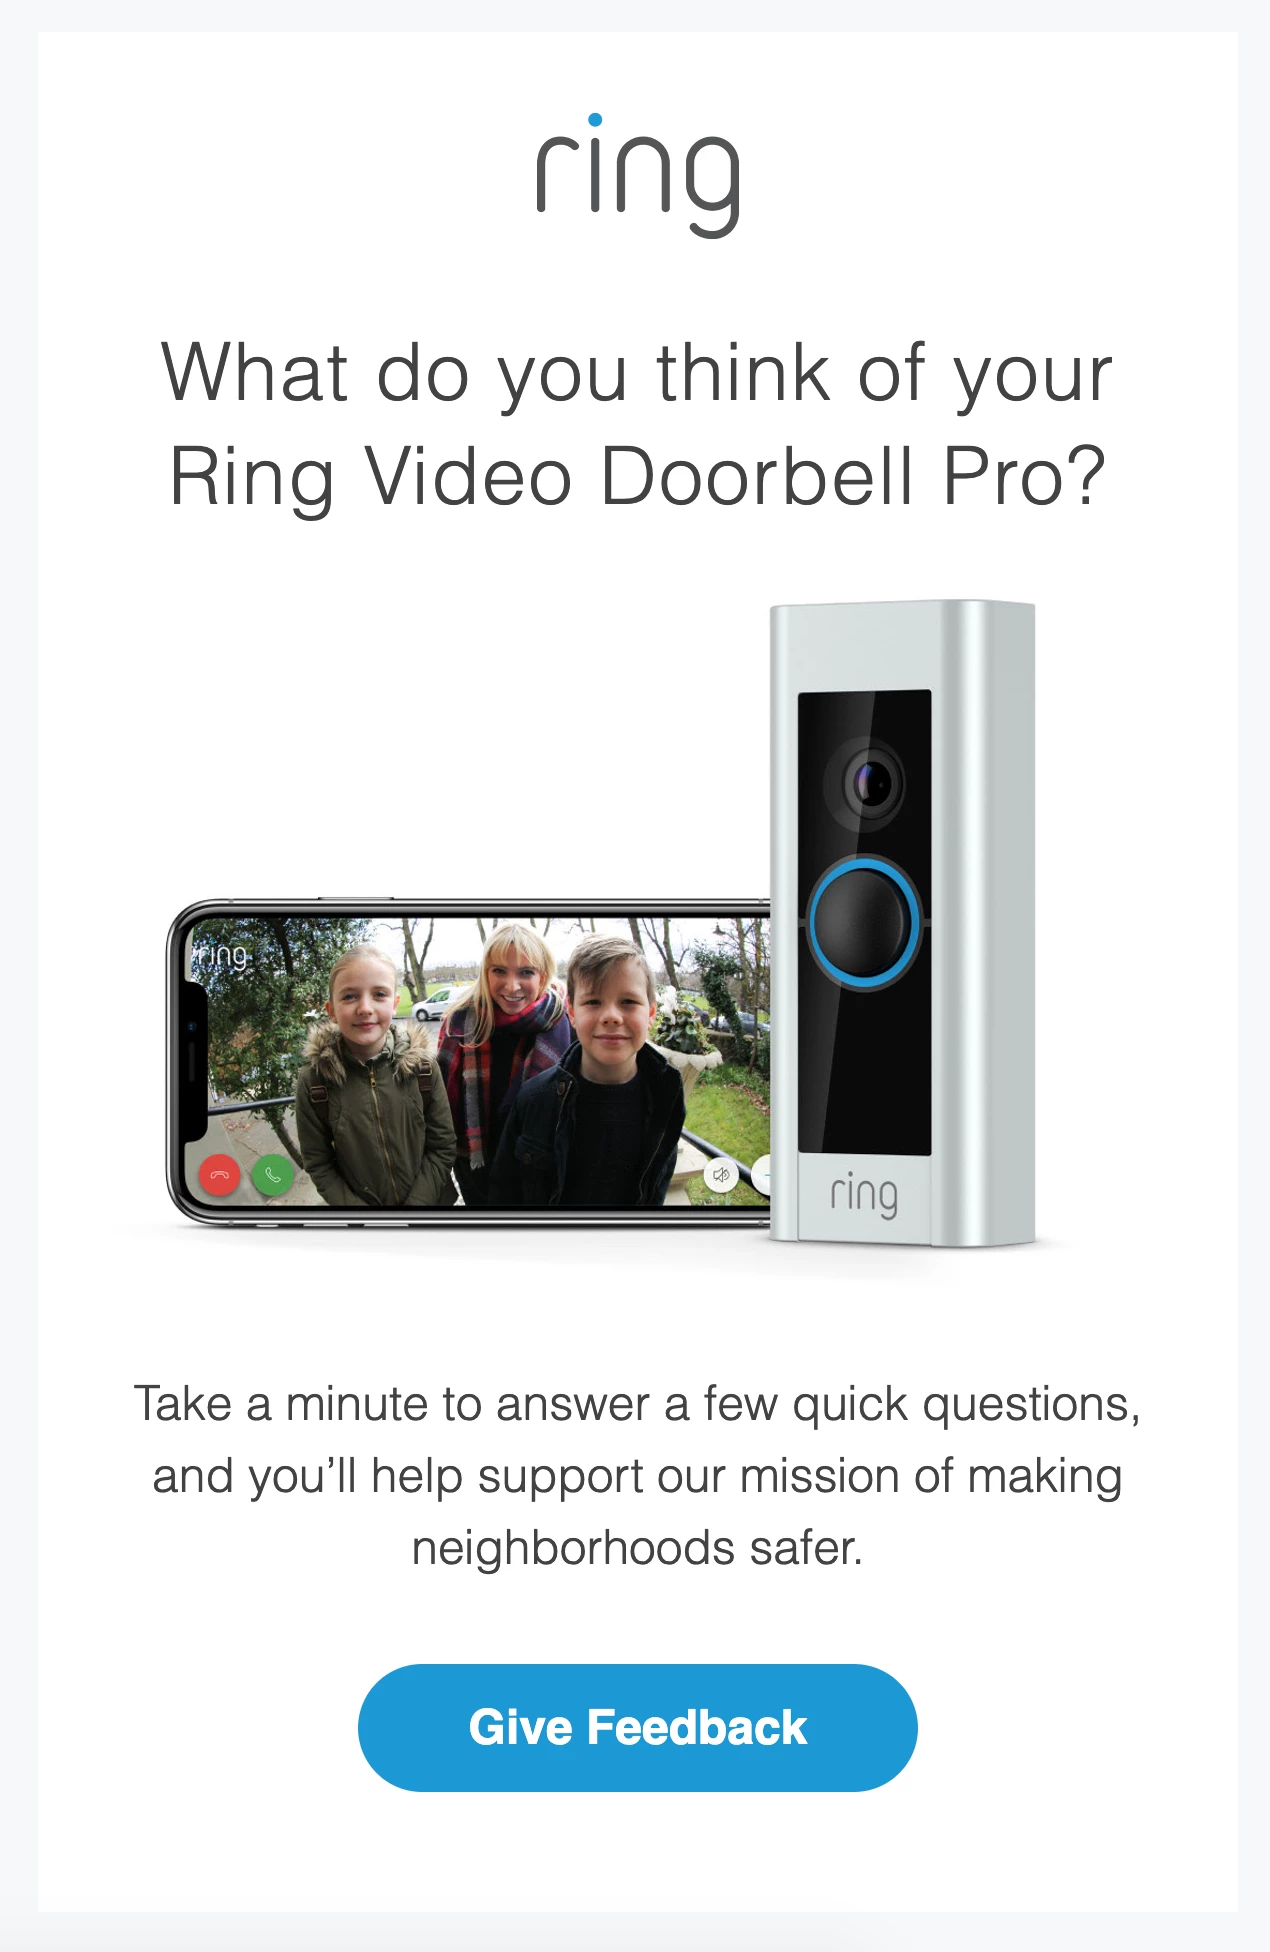 Ring survey newsletter with a product image